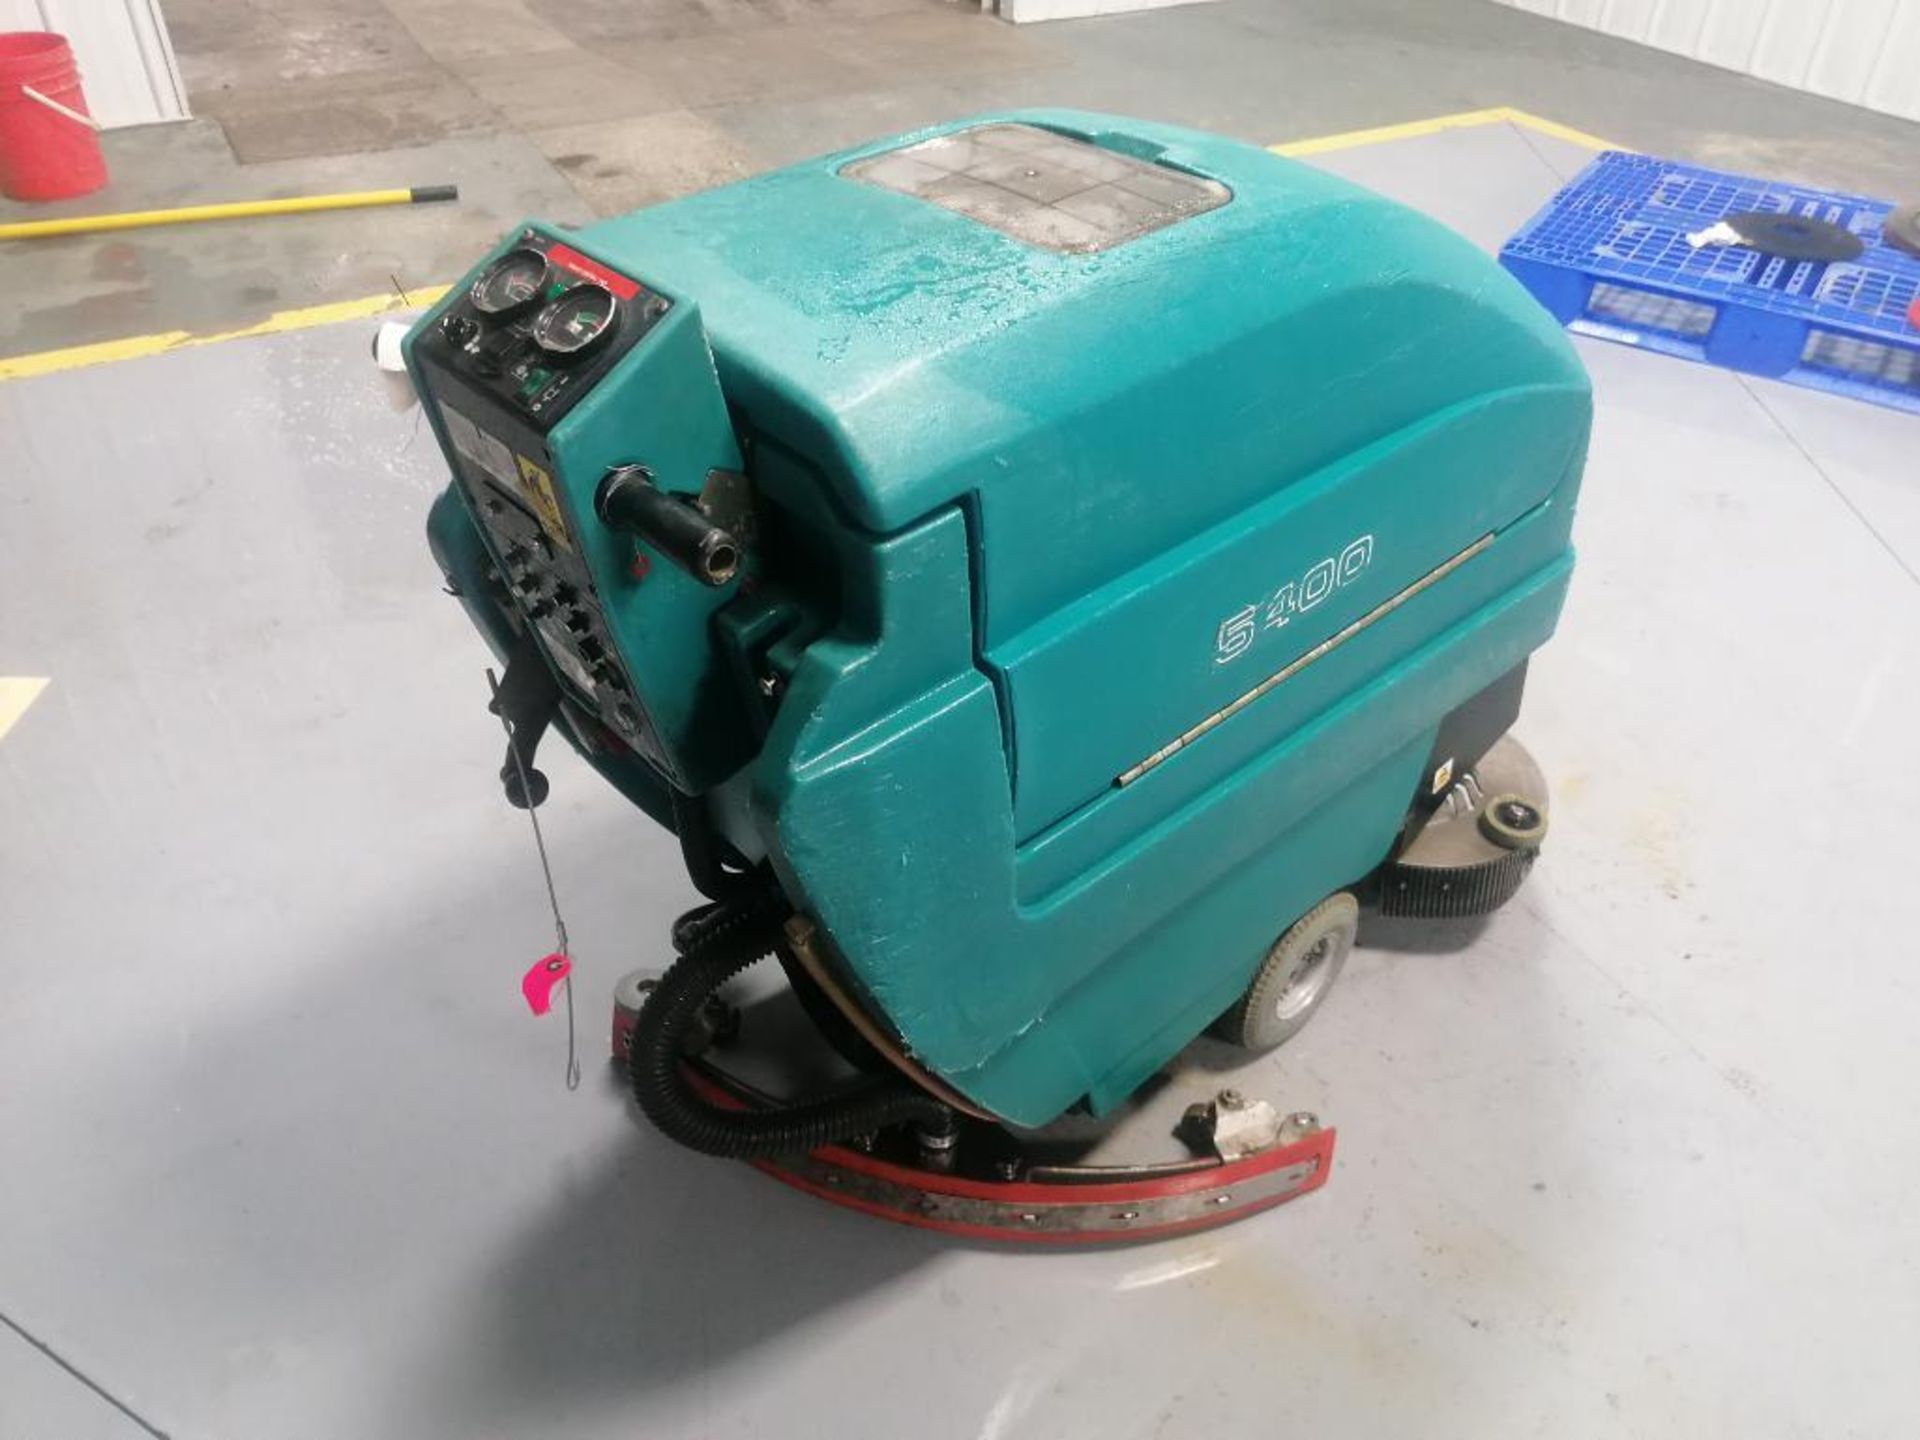 Tennant 5400 Floor Scrubber, Serial #540010203098, 24 Volts. Located in Mt. Pleasant, IA. - Image 3 of 17